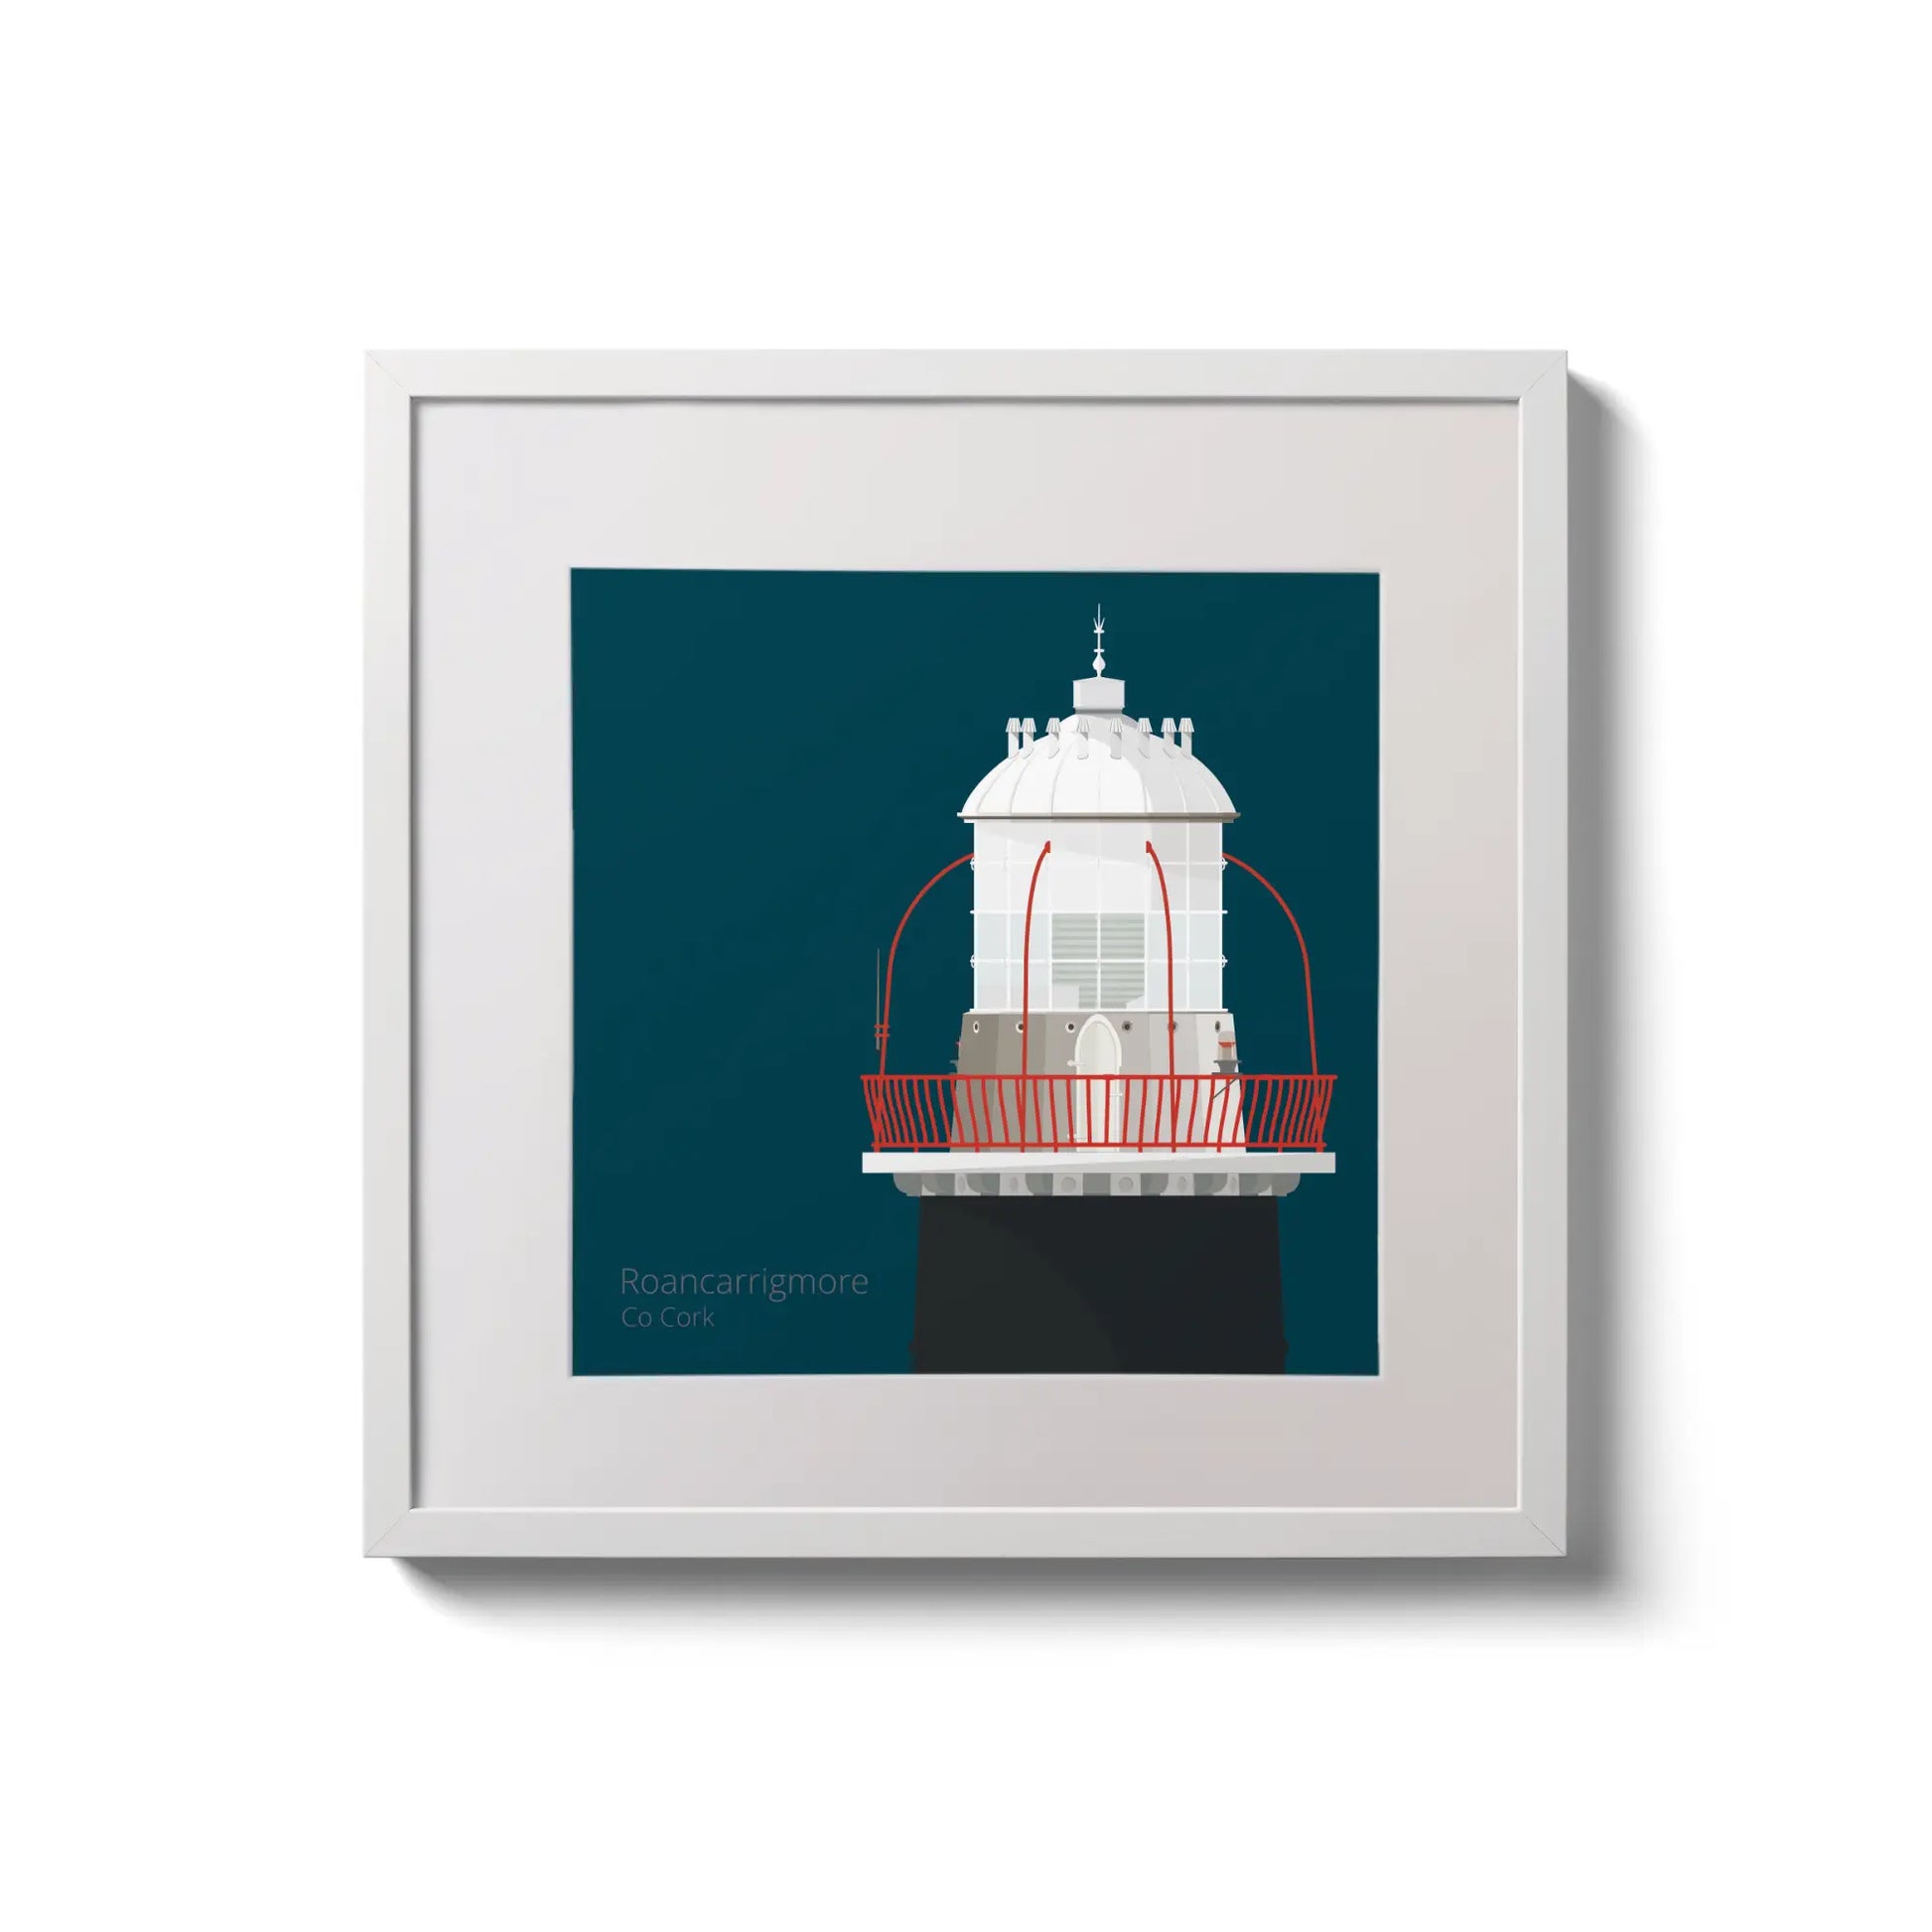 Illustration of Roancarrigmore lighthouse on a midnight blue background,  in a white square frame measuring 20x20cm.